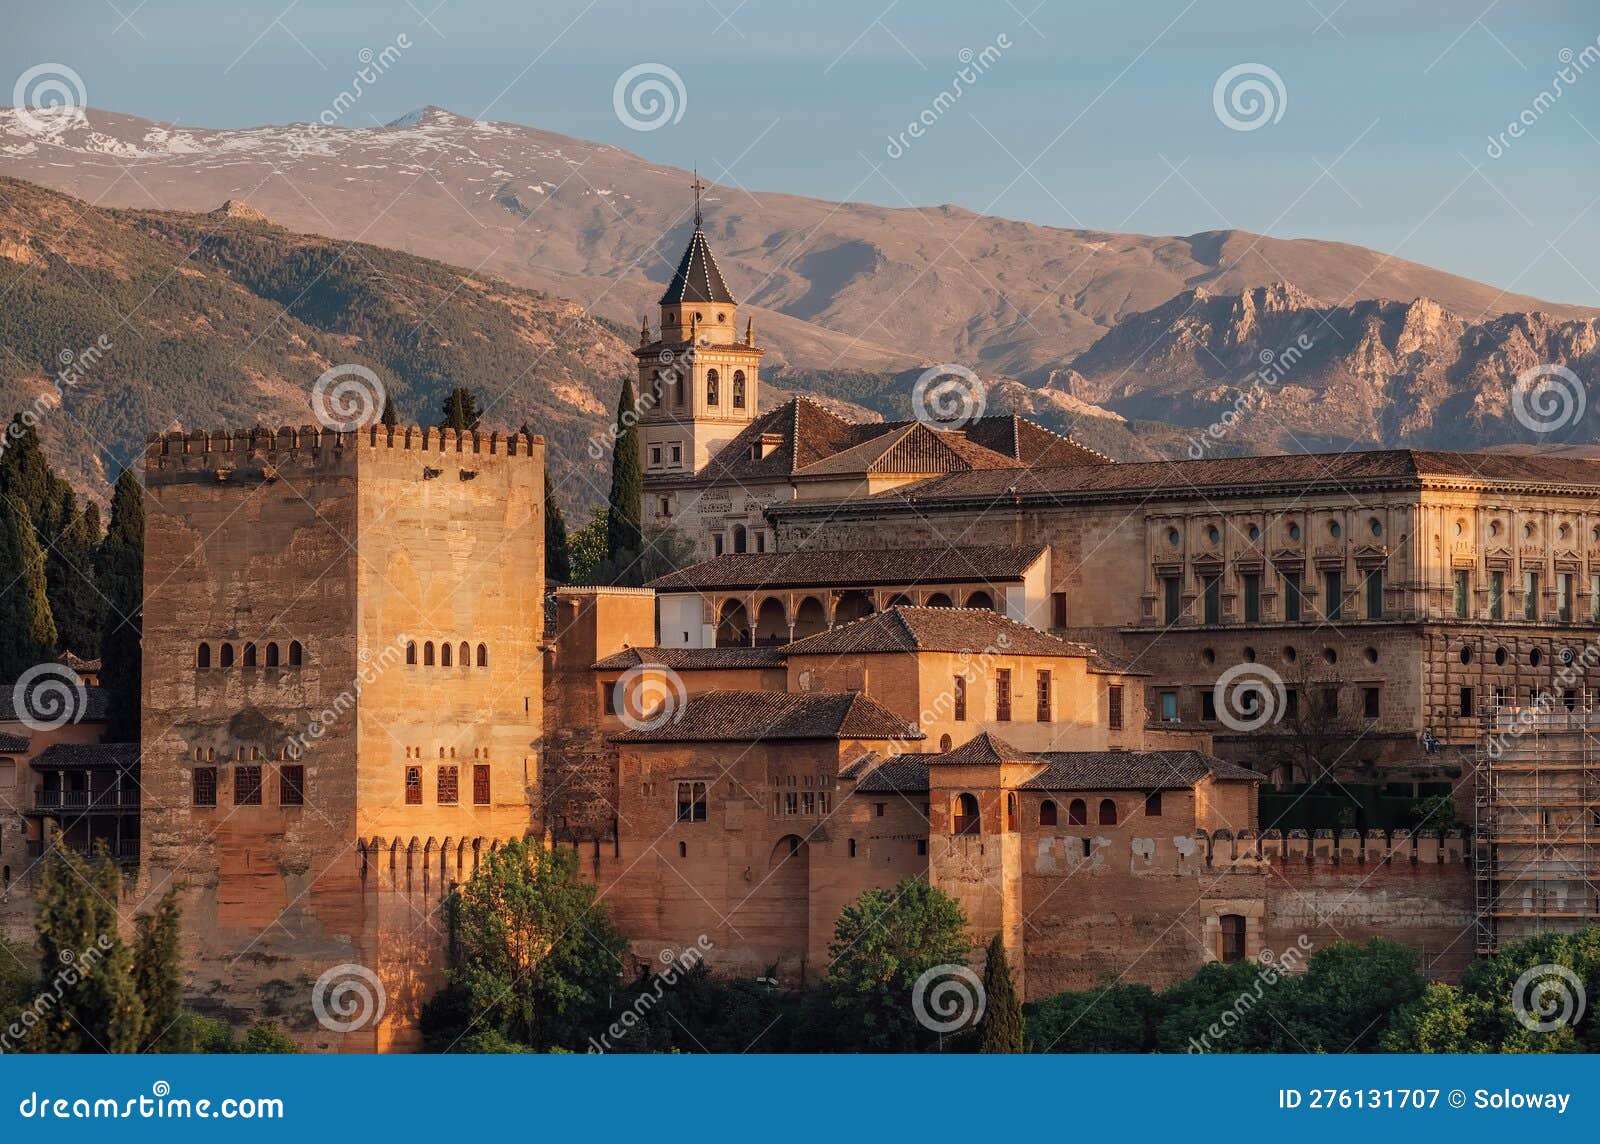 charles v palace and church of santa maria de la alhambra in medieval fortress complex with sierra nevada snowy mountains,